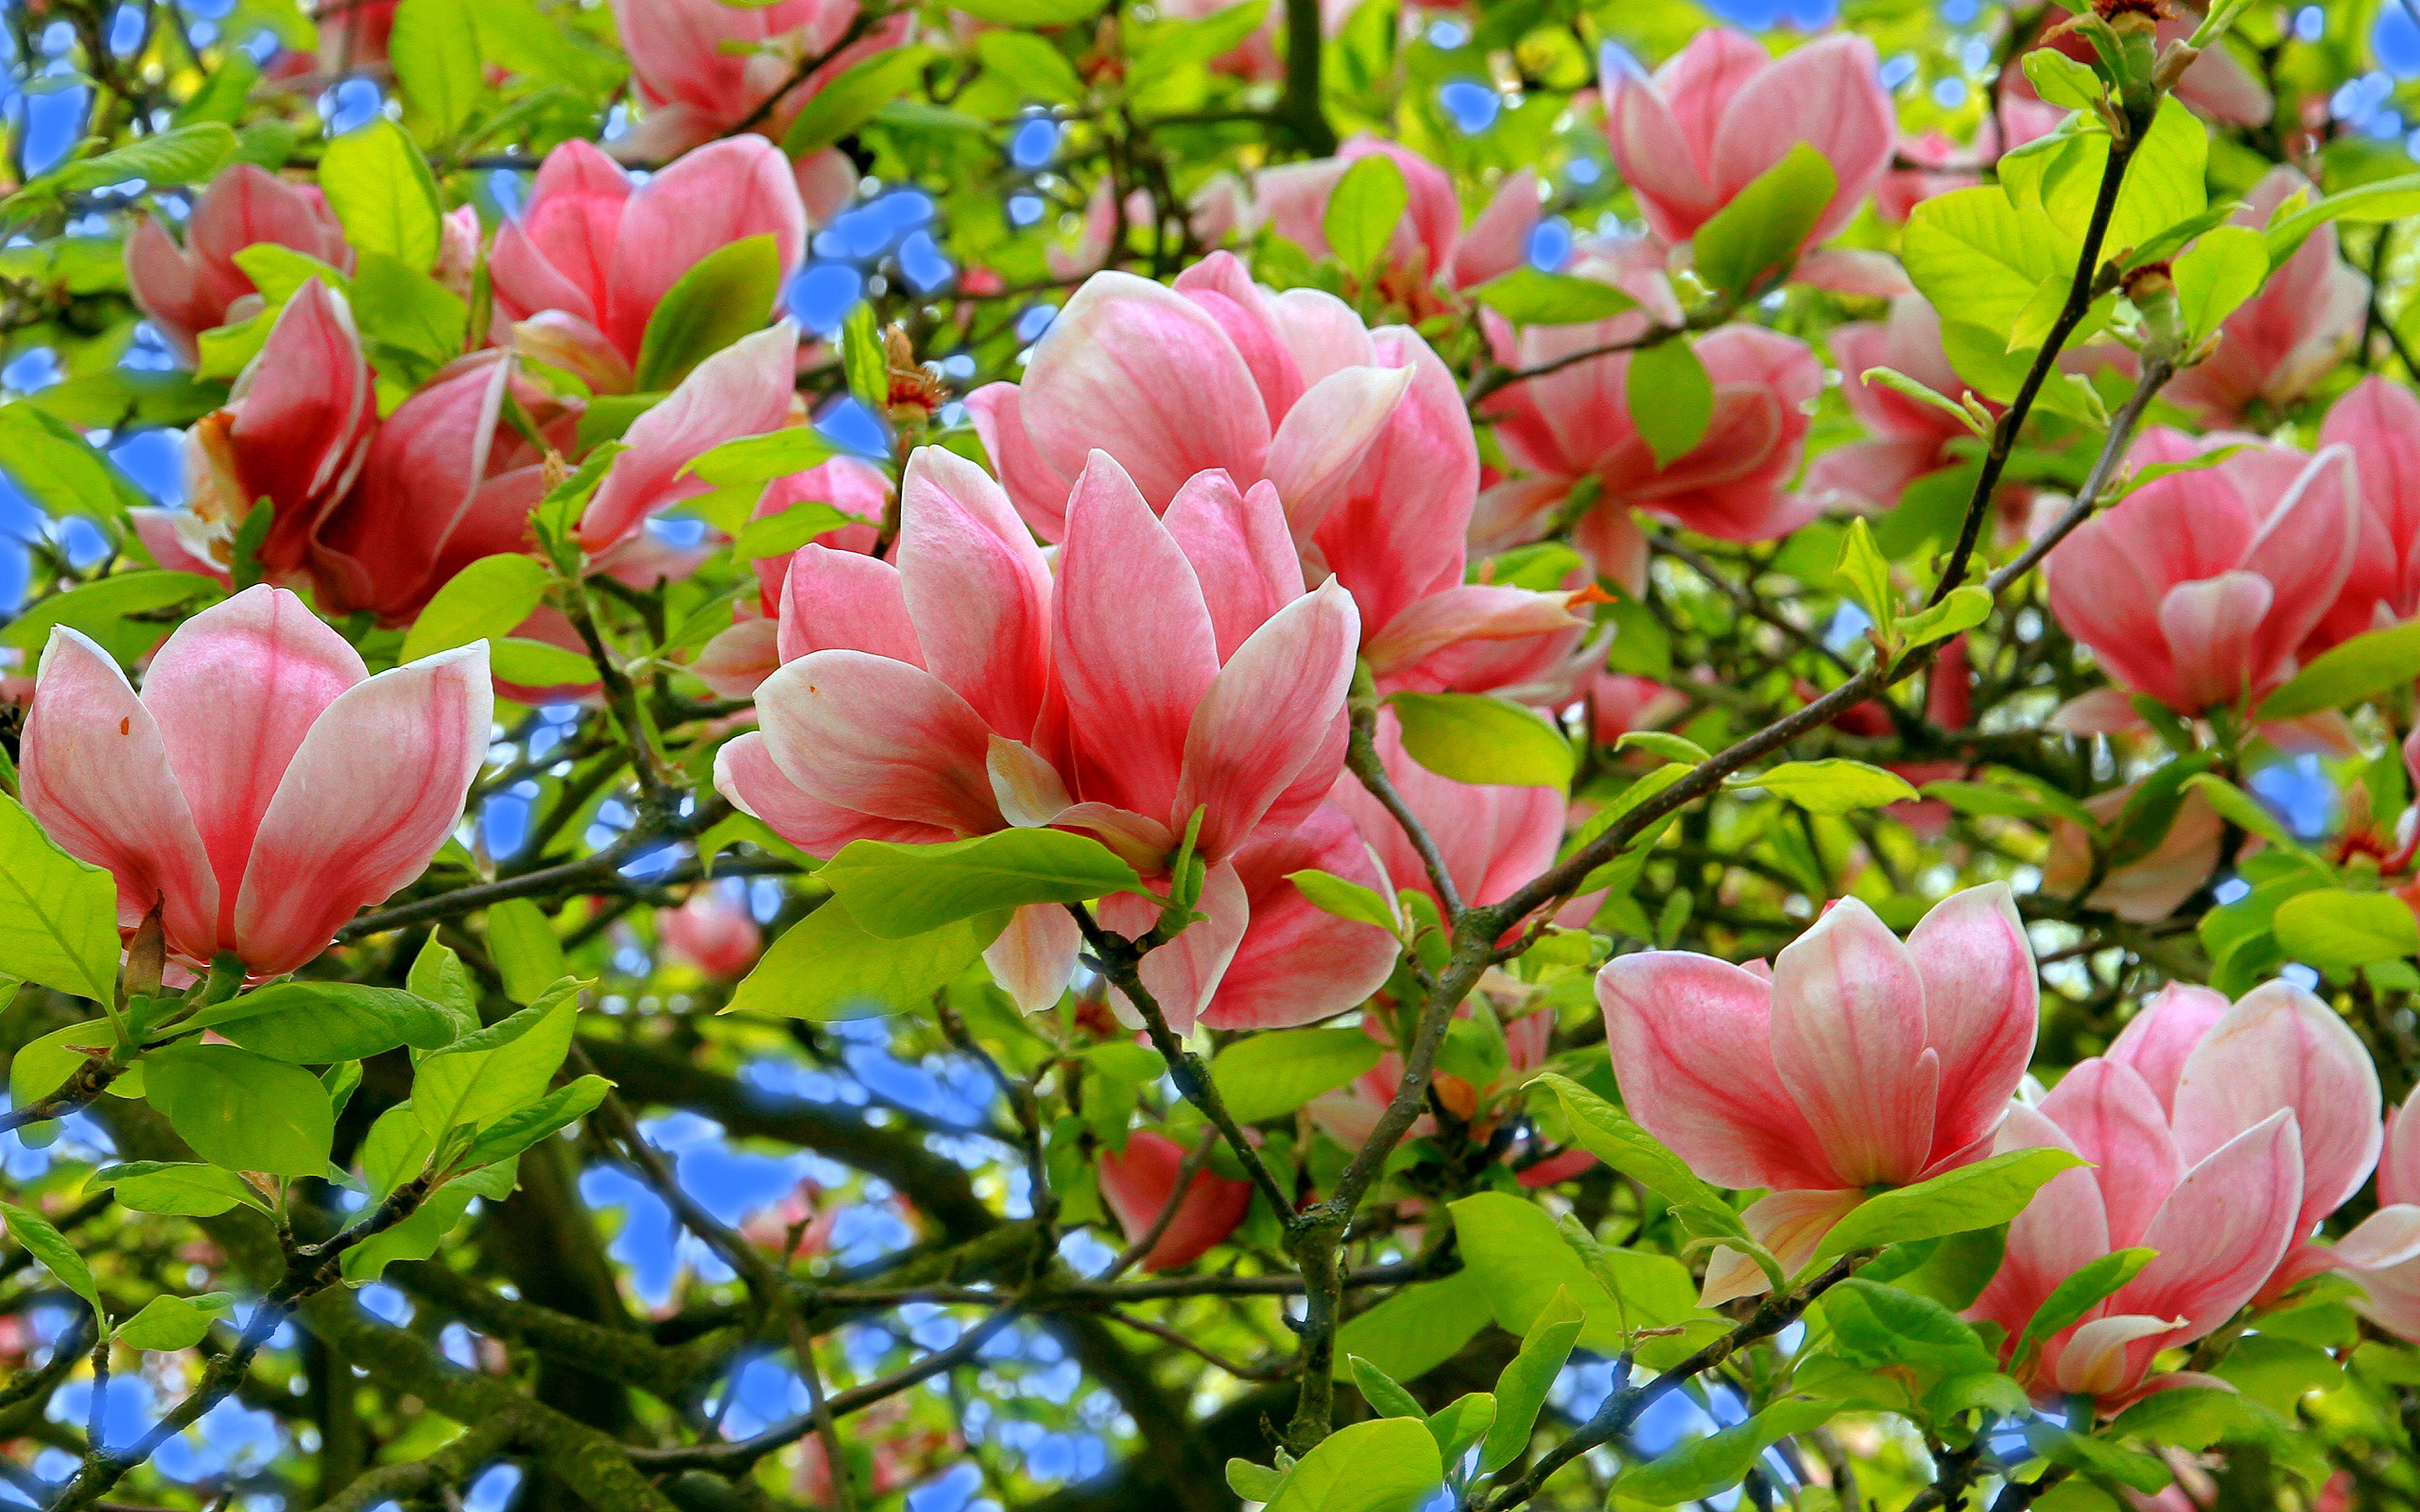 magnolia, earth, blossom, branch, close up, flower, magnolia blossom, nature, pink flower, trees